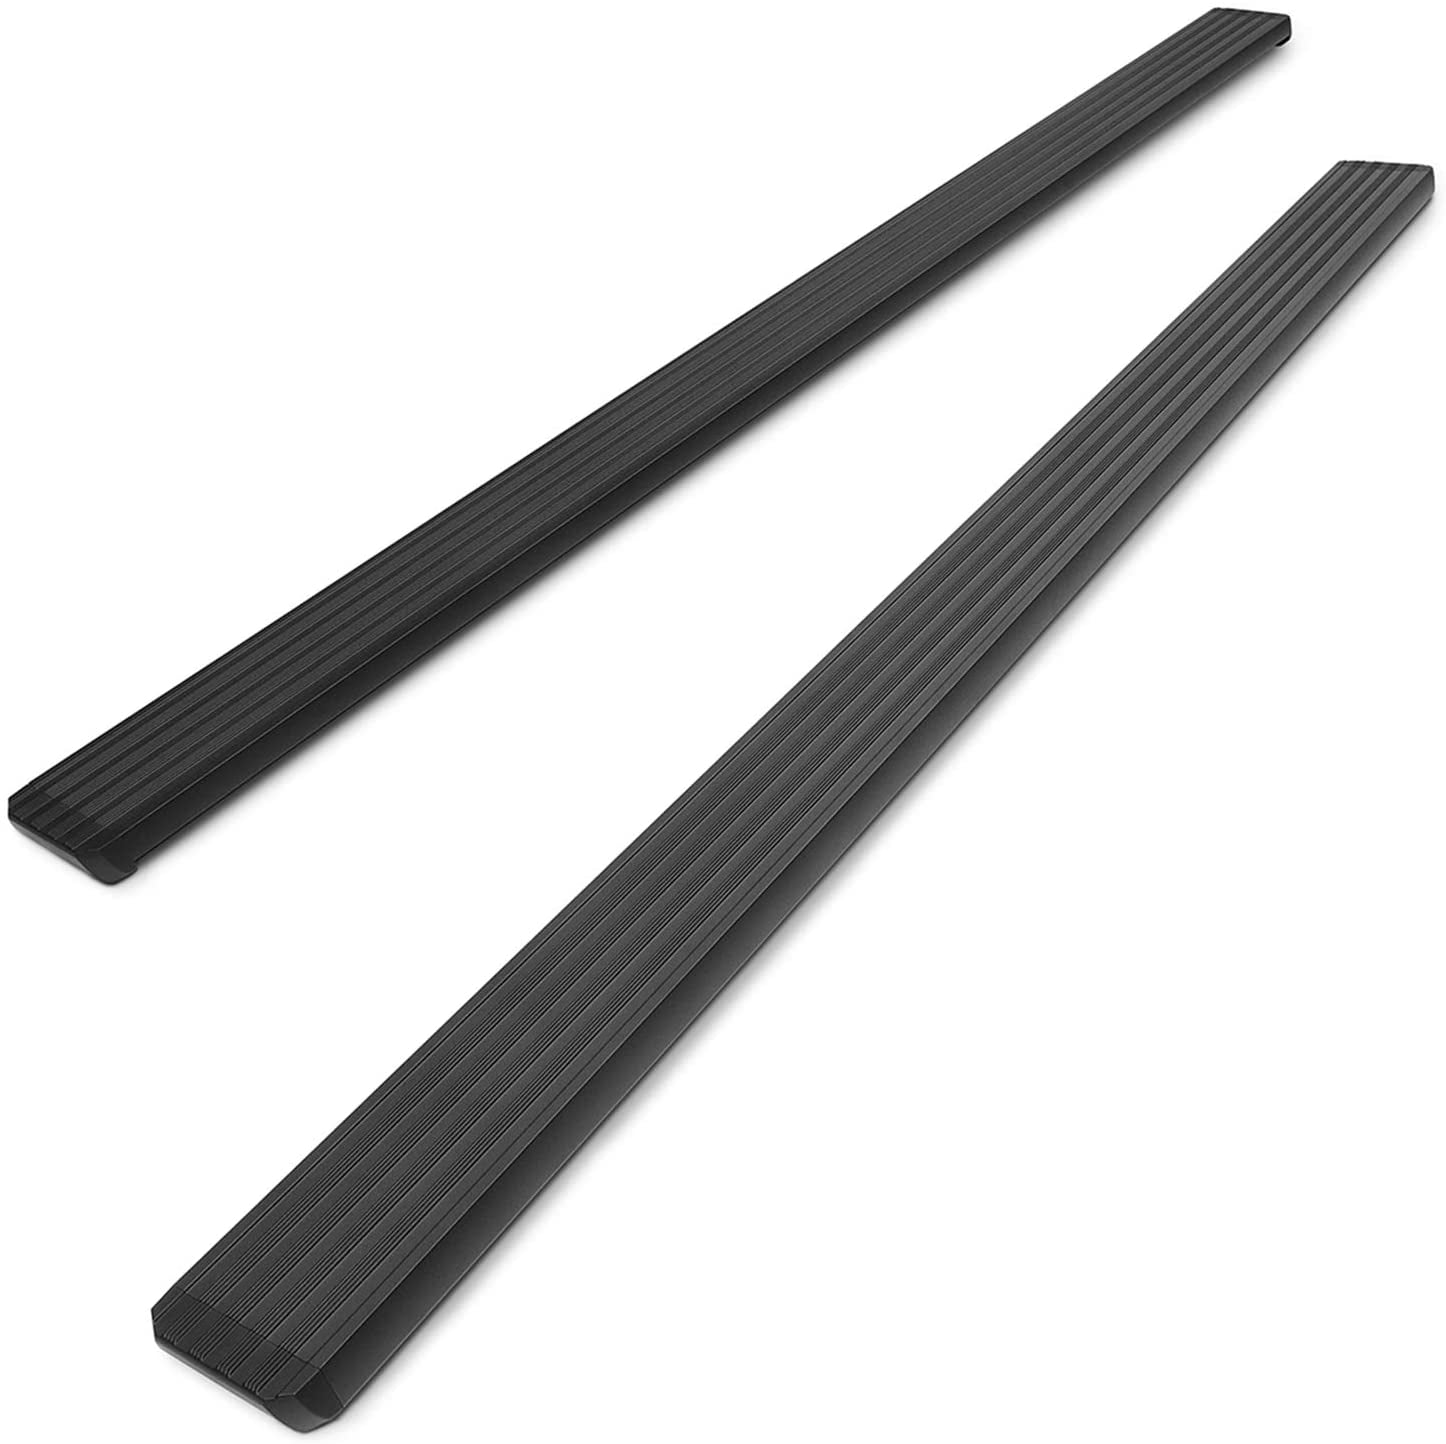 2 Pieces 2017-2021 Ford F250 F350 Super Duty Super Cab Truck Pickup Black Nerf Bars Running Boards Off Road Exterior Accessories TAC Side Steps Fit 2015-2021 Ford F150 Super Cab